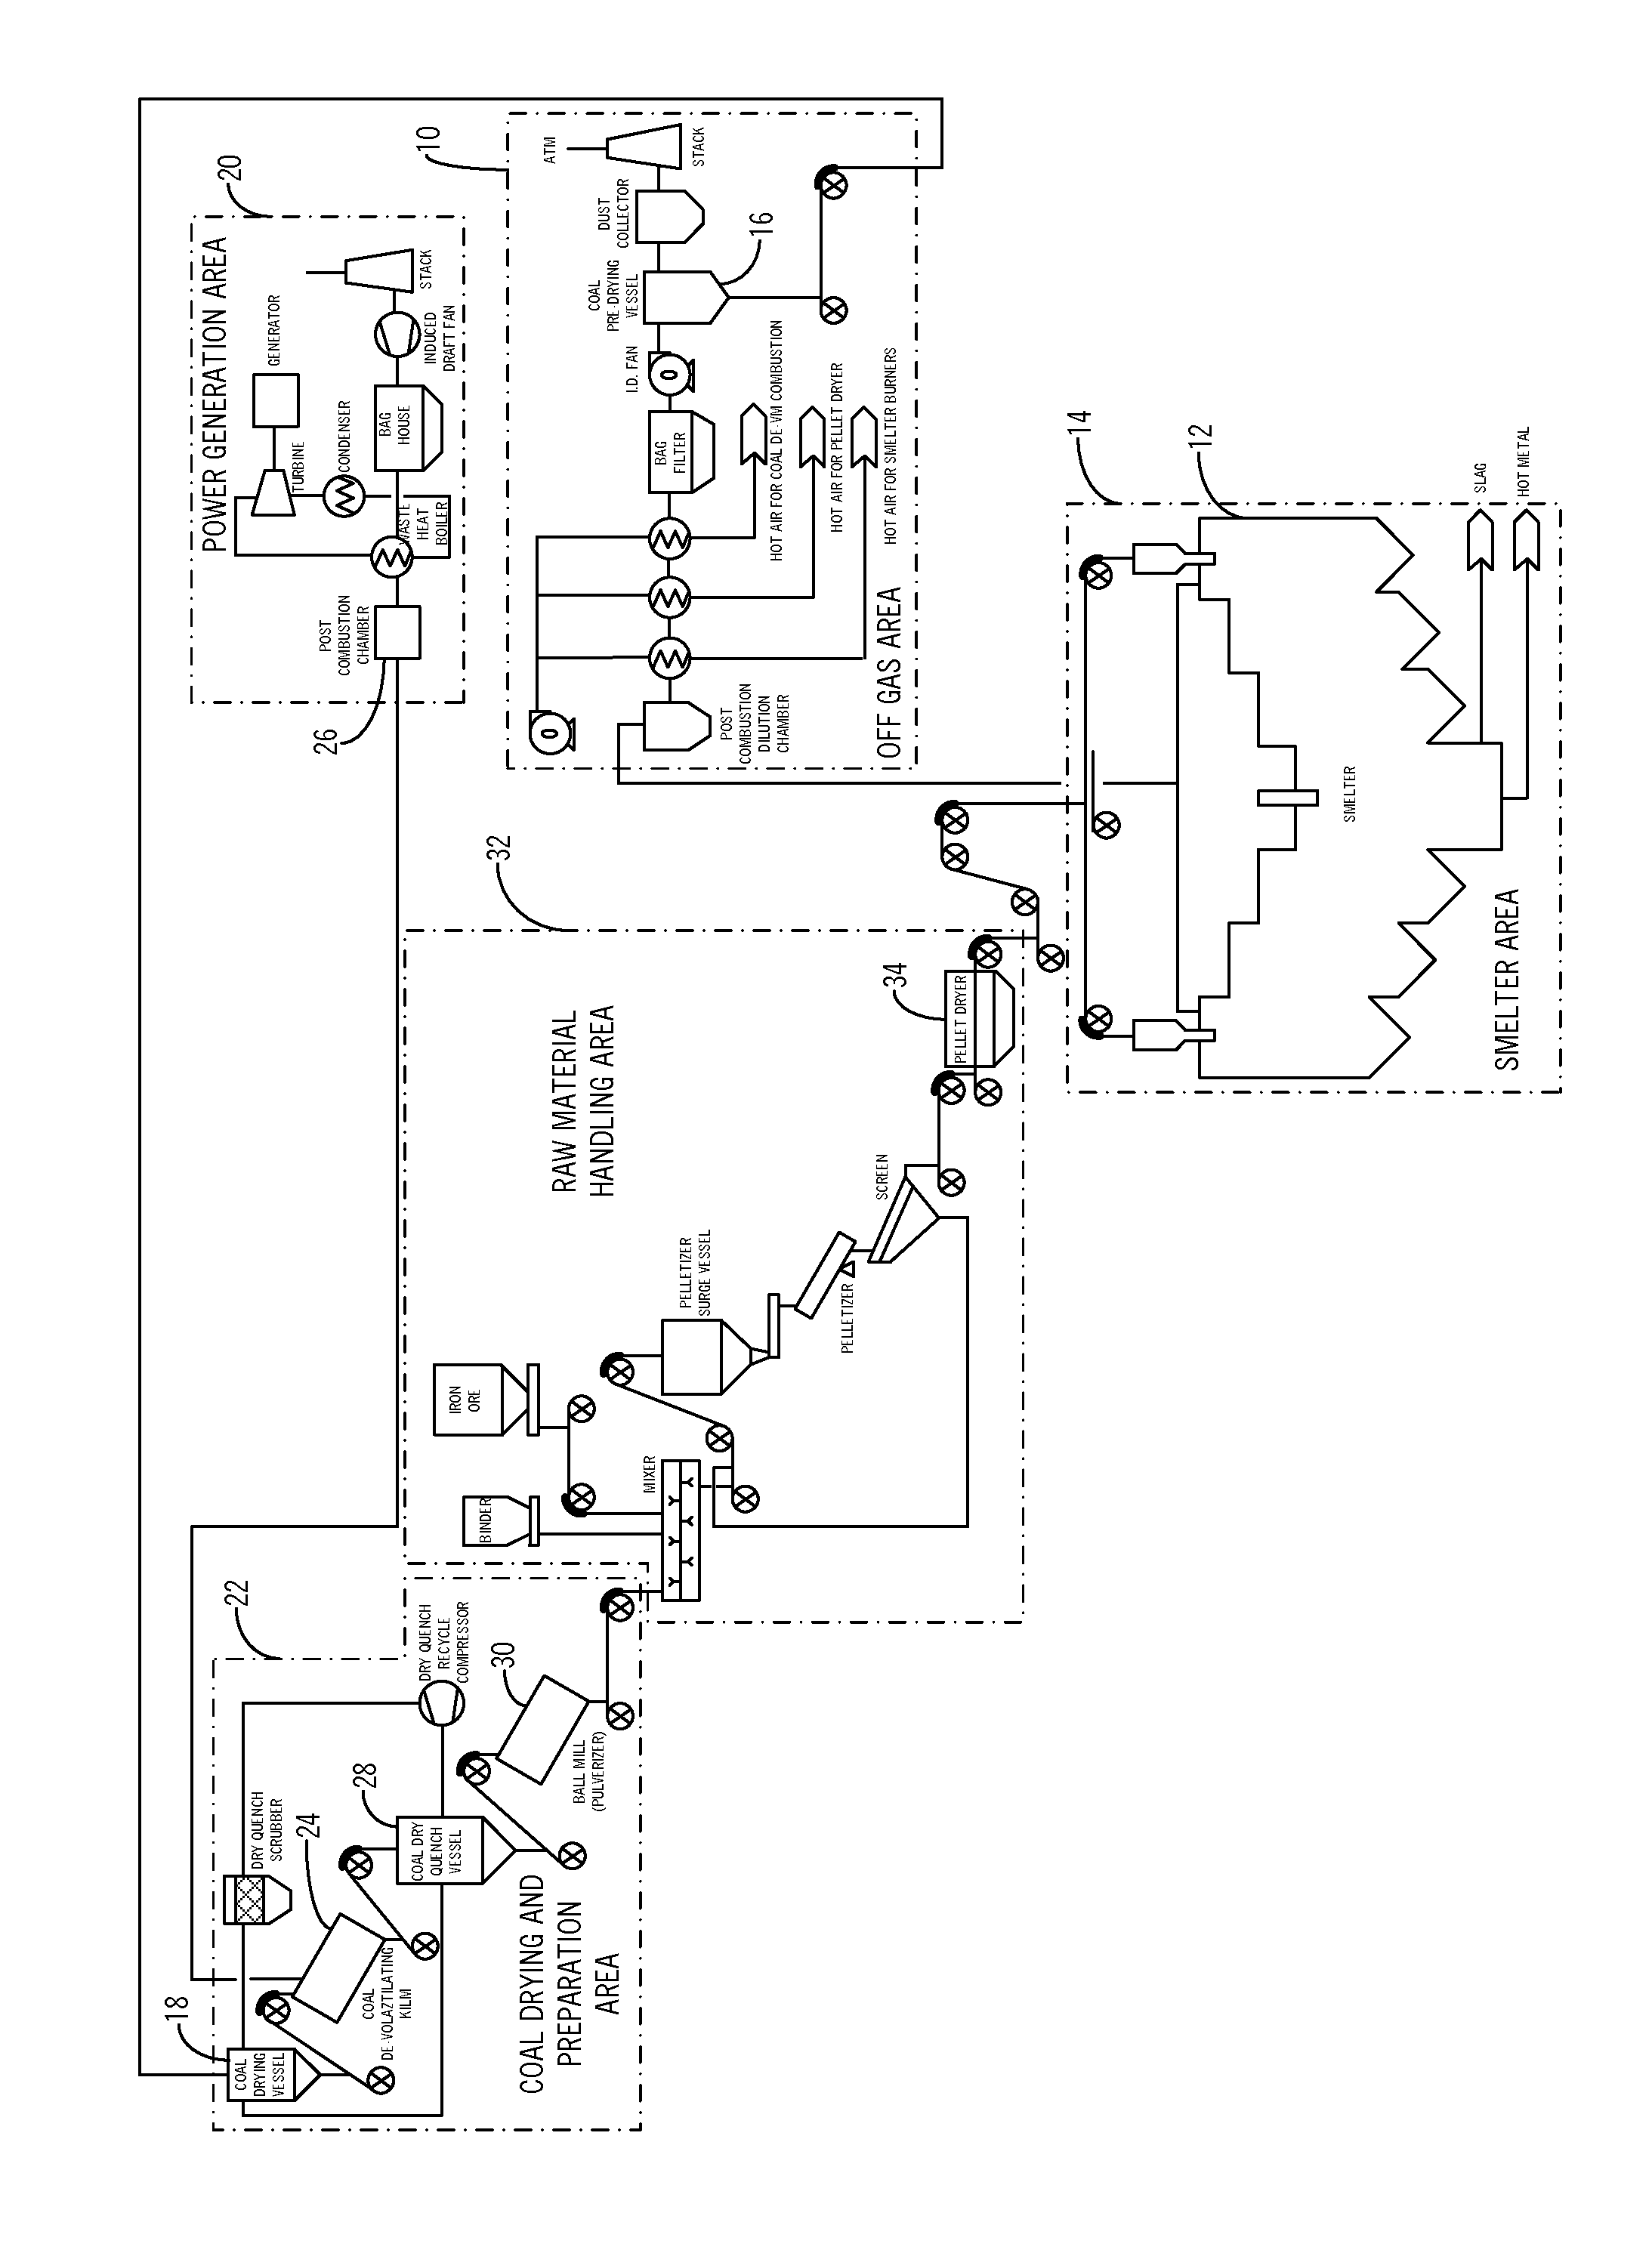 Method and system for producing direct reduced iron and/or hot metal using brown coal